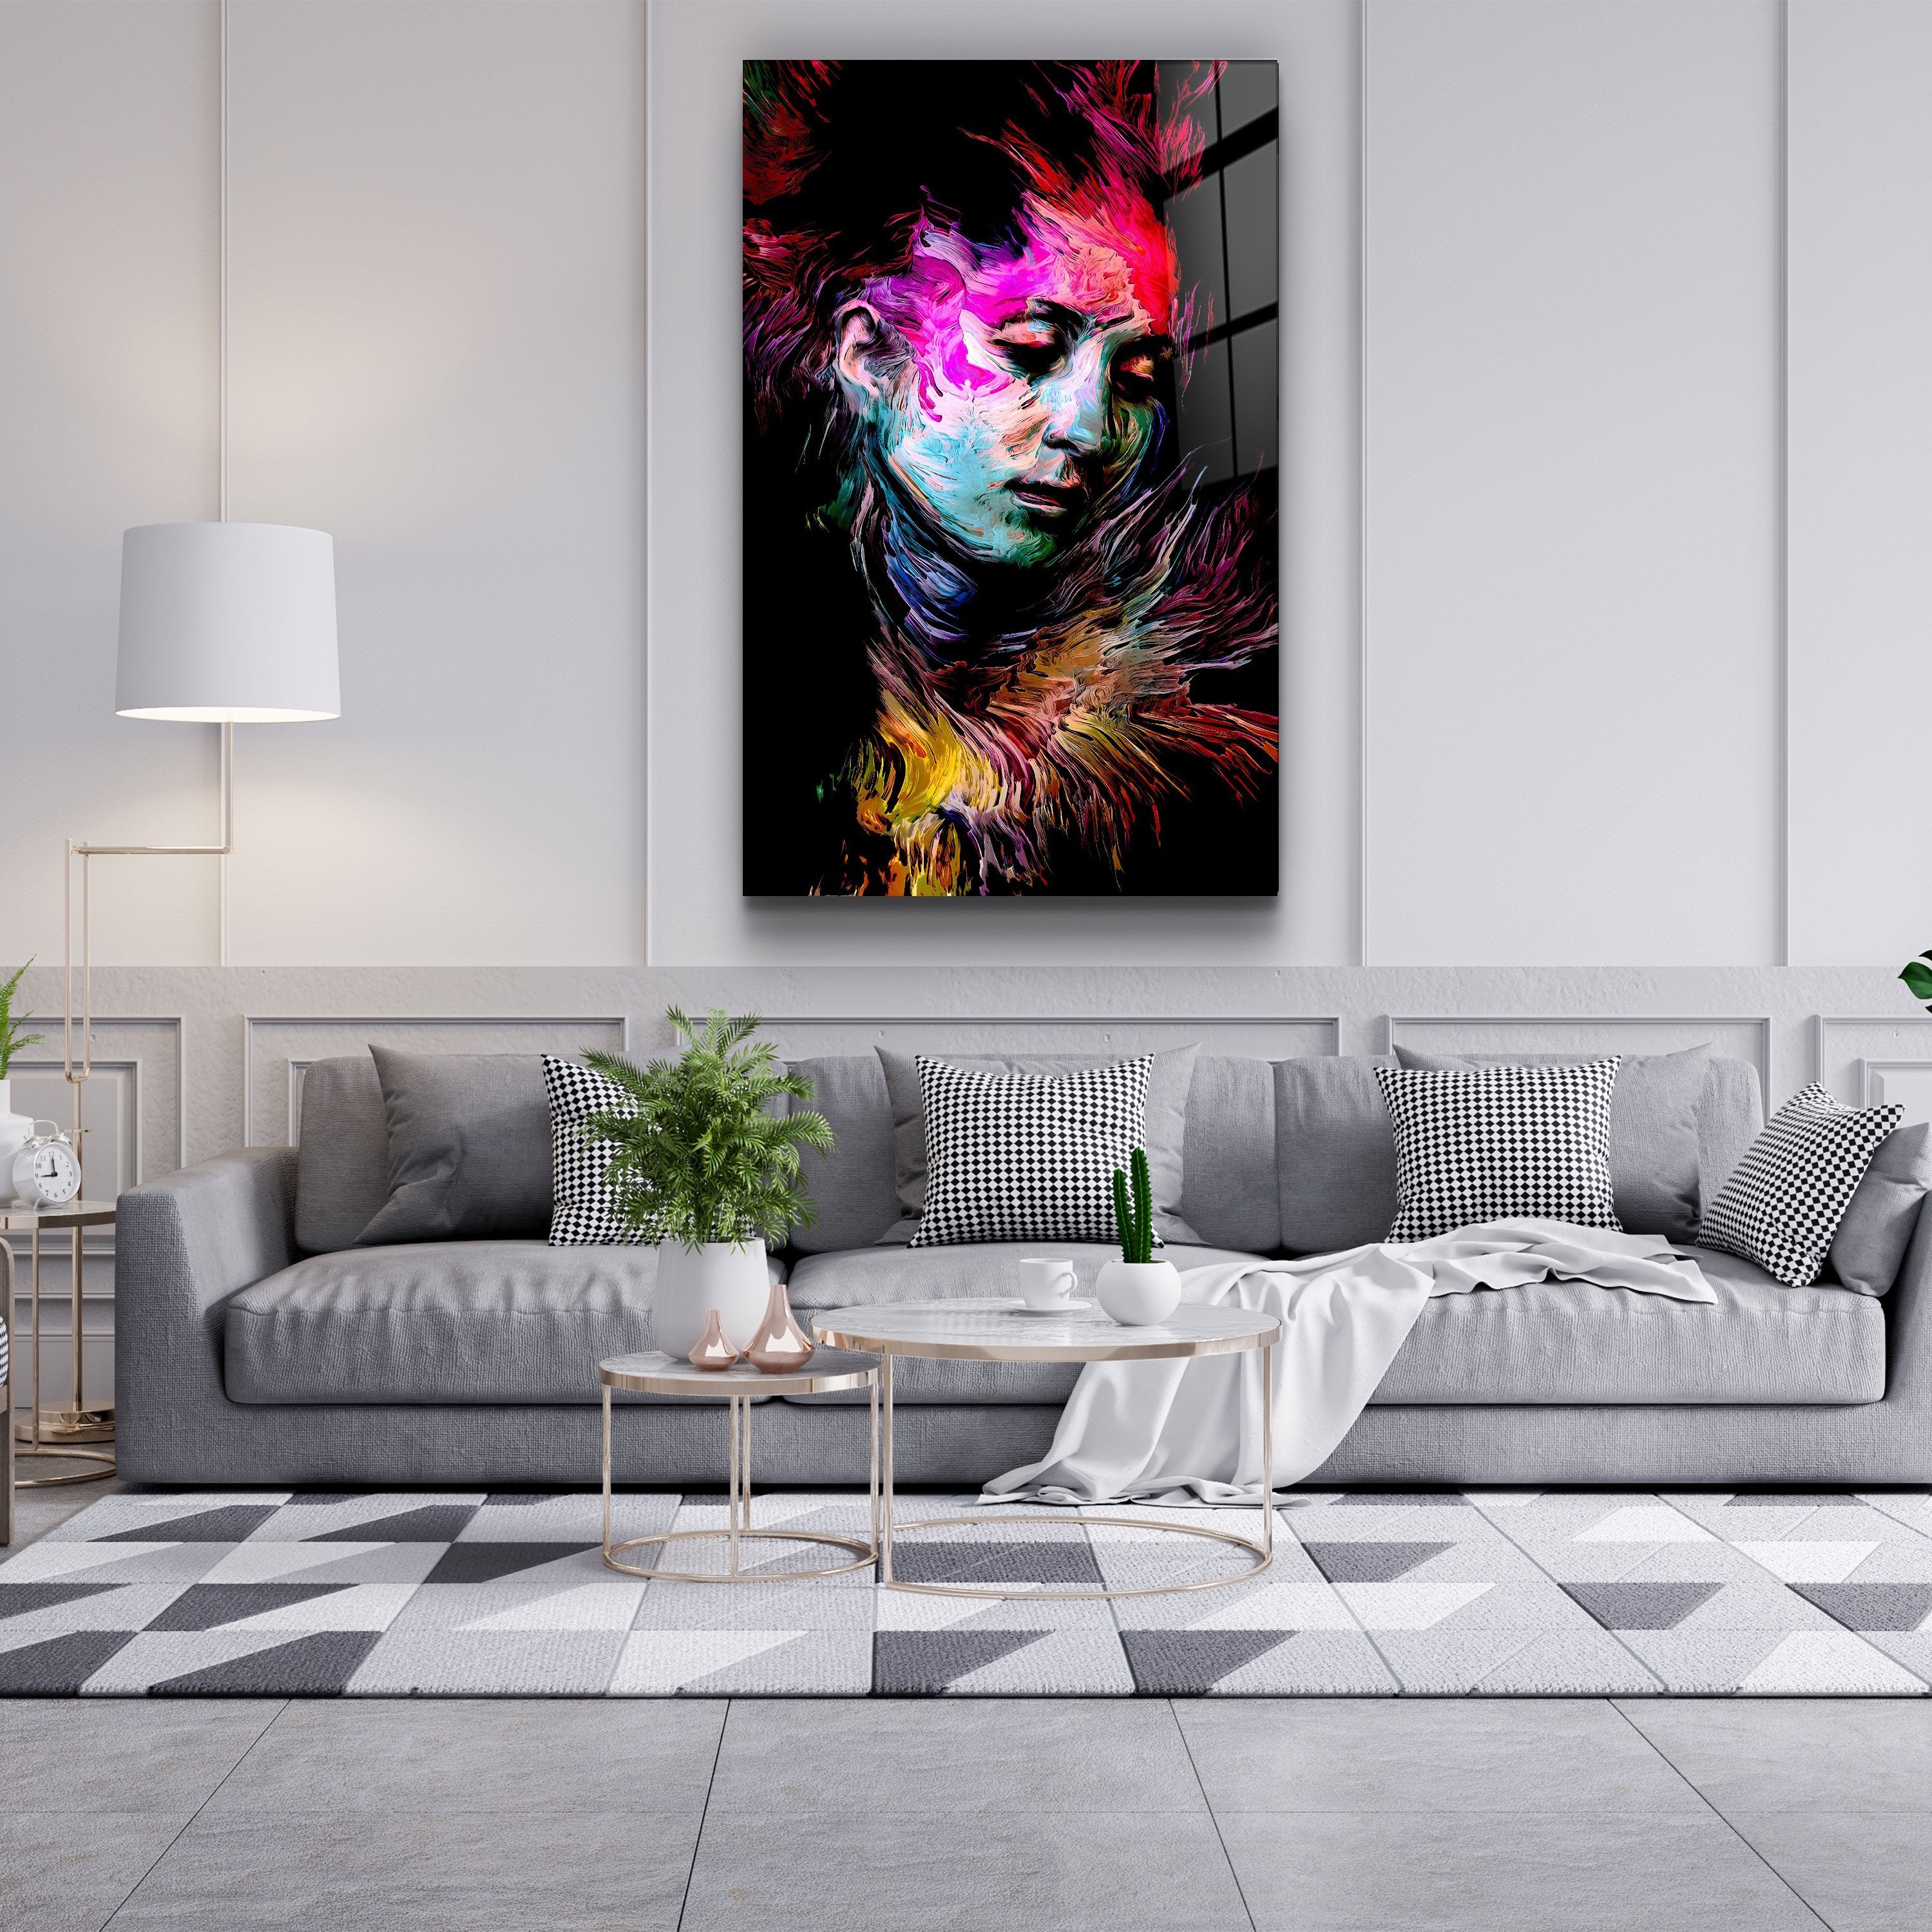 ・"Abstract Colorful Face"・Glass Wall Art